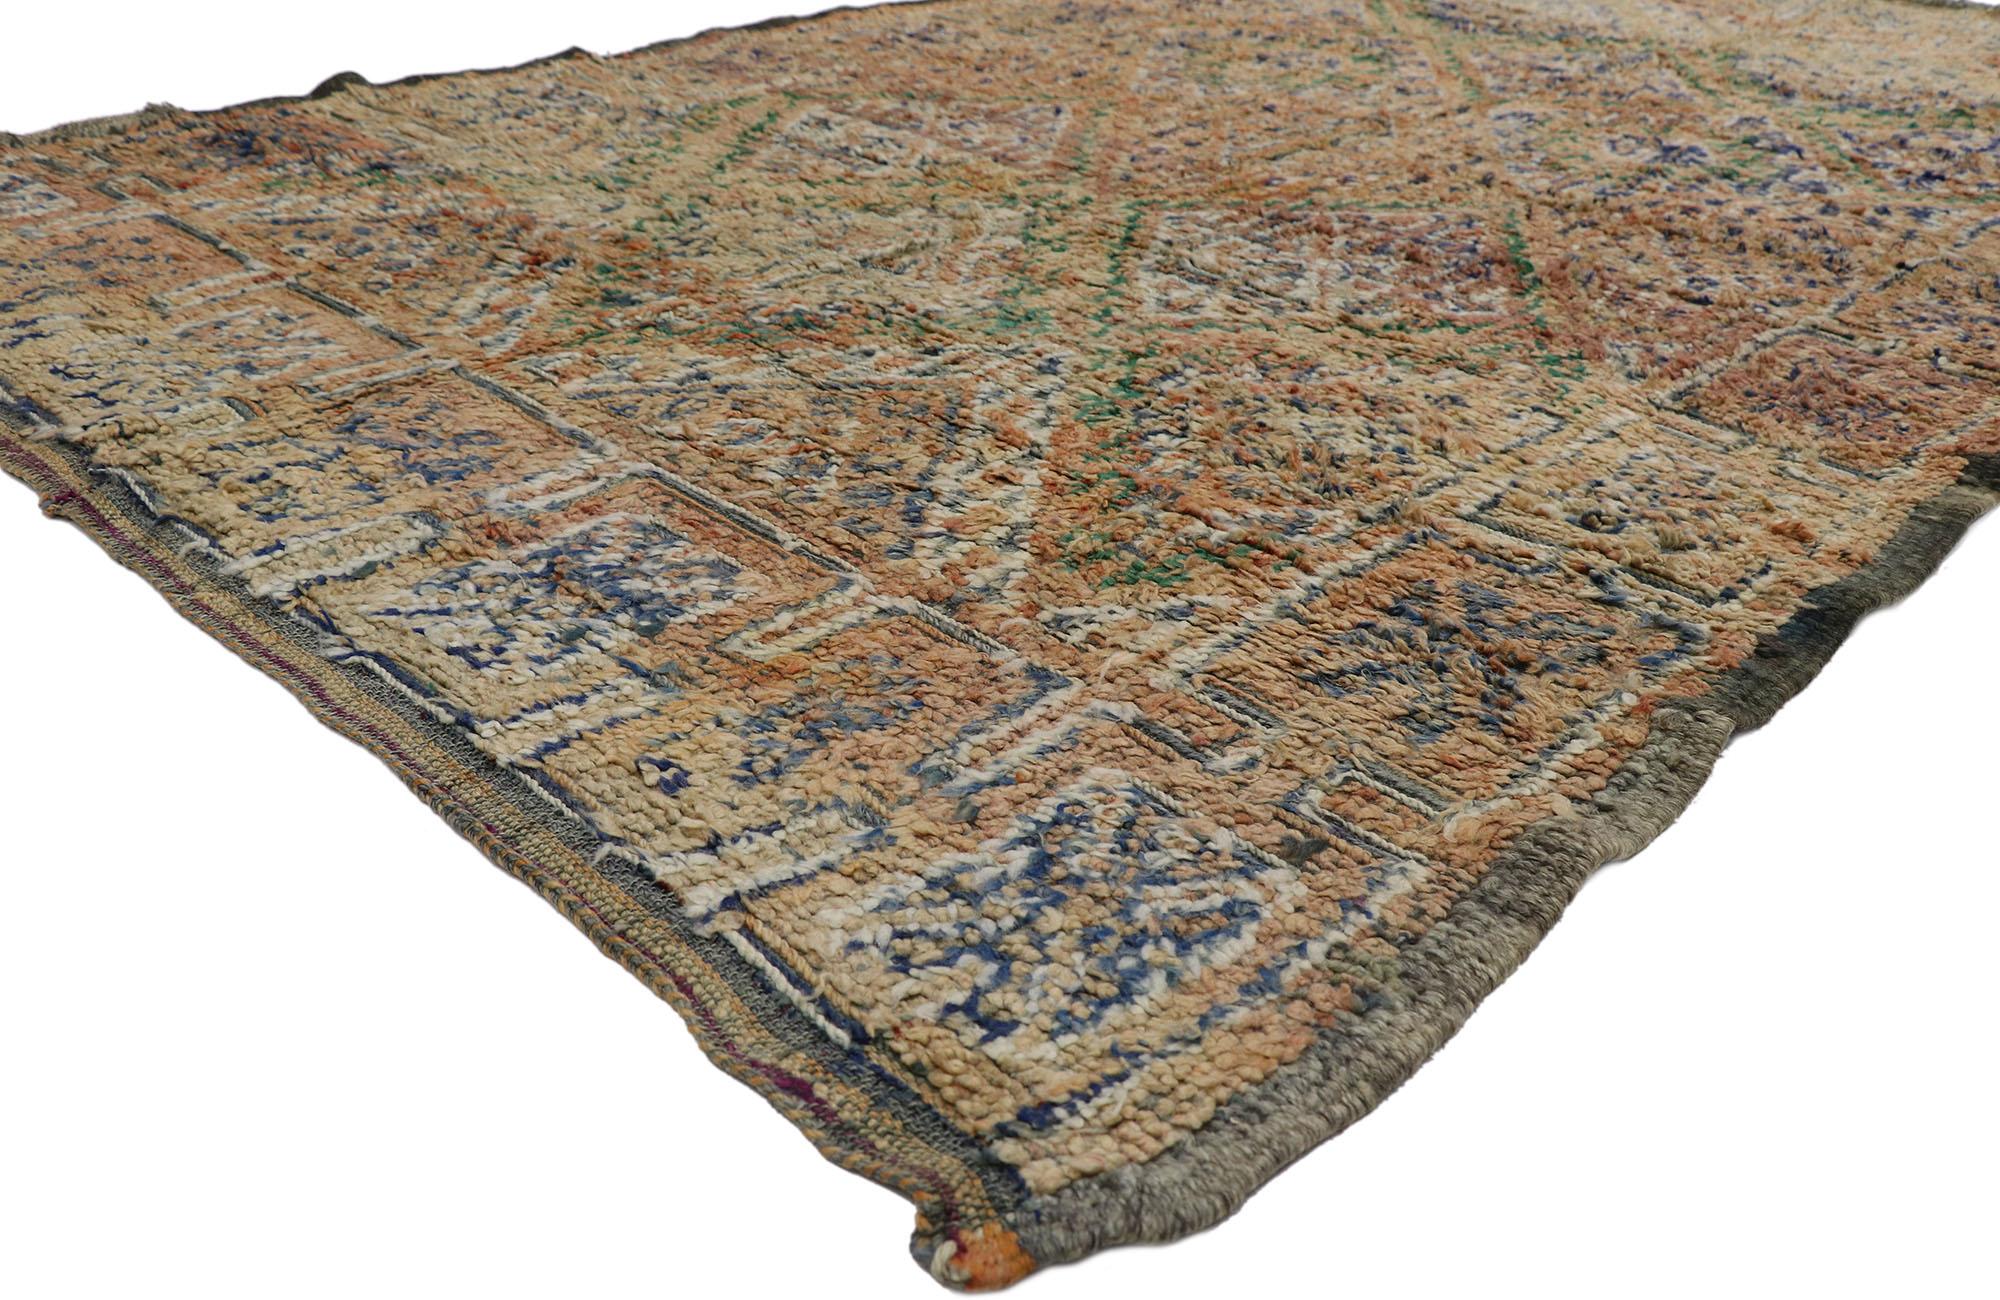 21249 Vintage Berber Moroccan Rug, 06'03 x 10'04.
Nomadic charm meets sunbaked elegance in this hand-knotted wool vintage Moroccan rug. The detailed lozenge lattice and faded earth-tone colors woven into this piece work together creating an